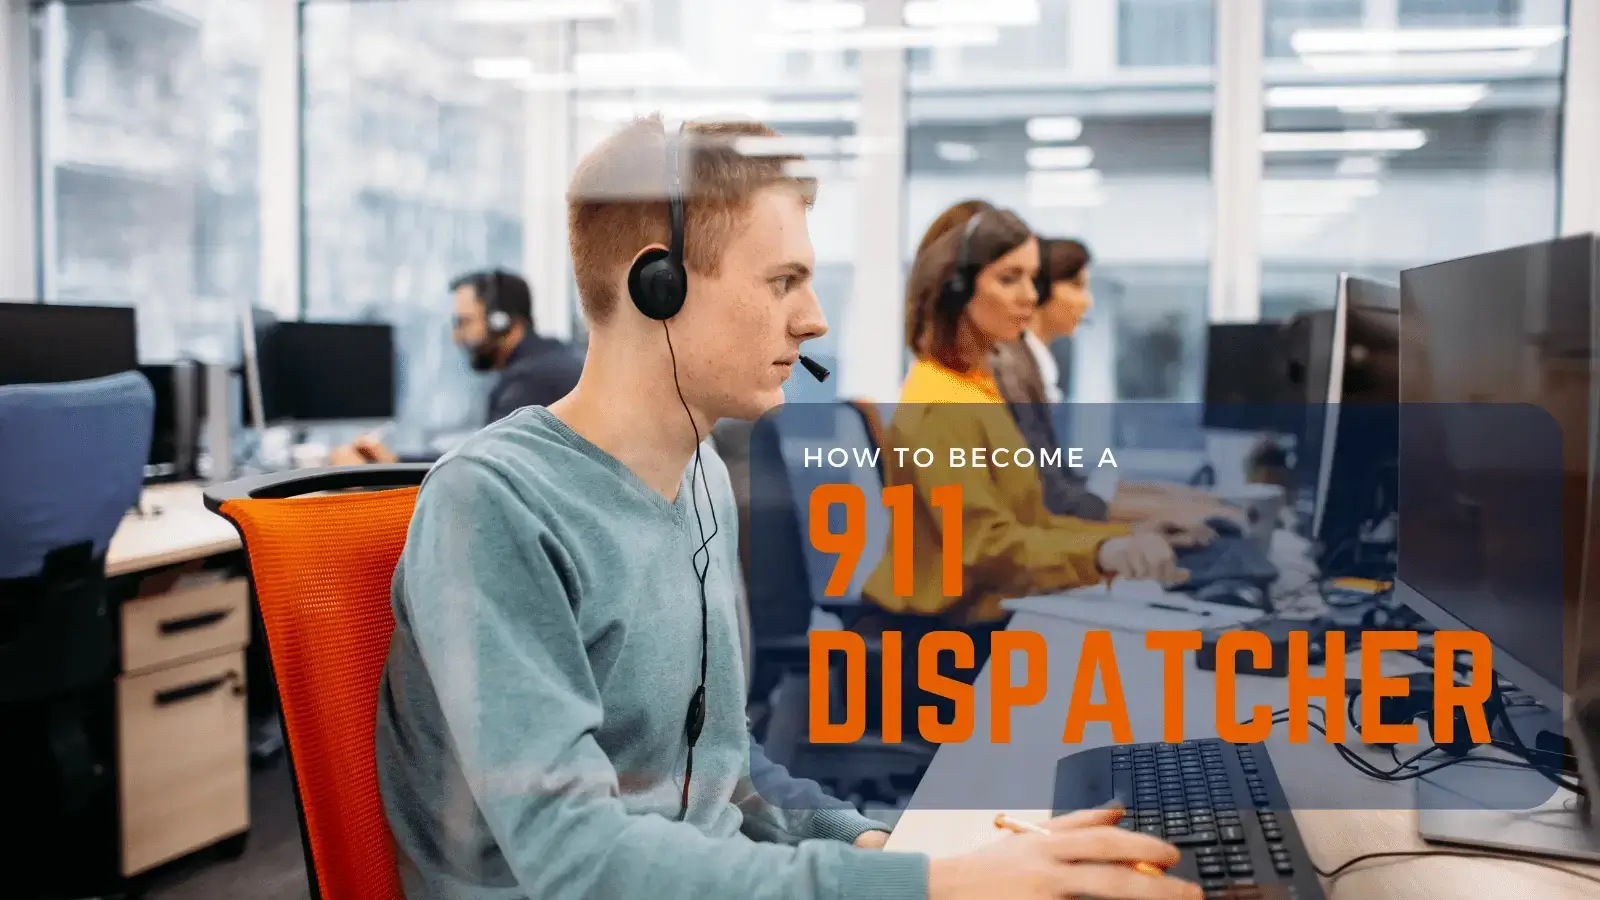 Steps to become a 911 Dispatcher